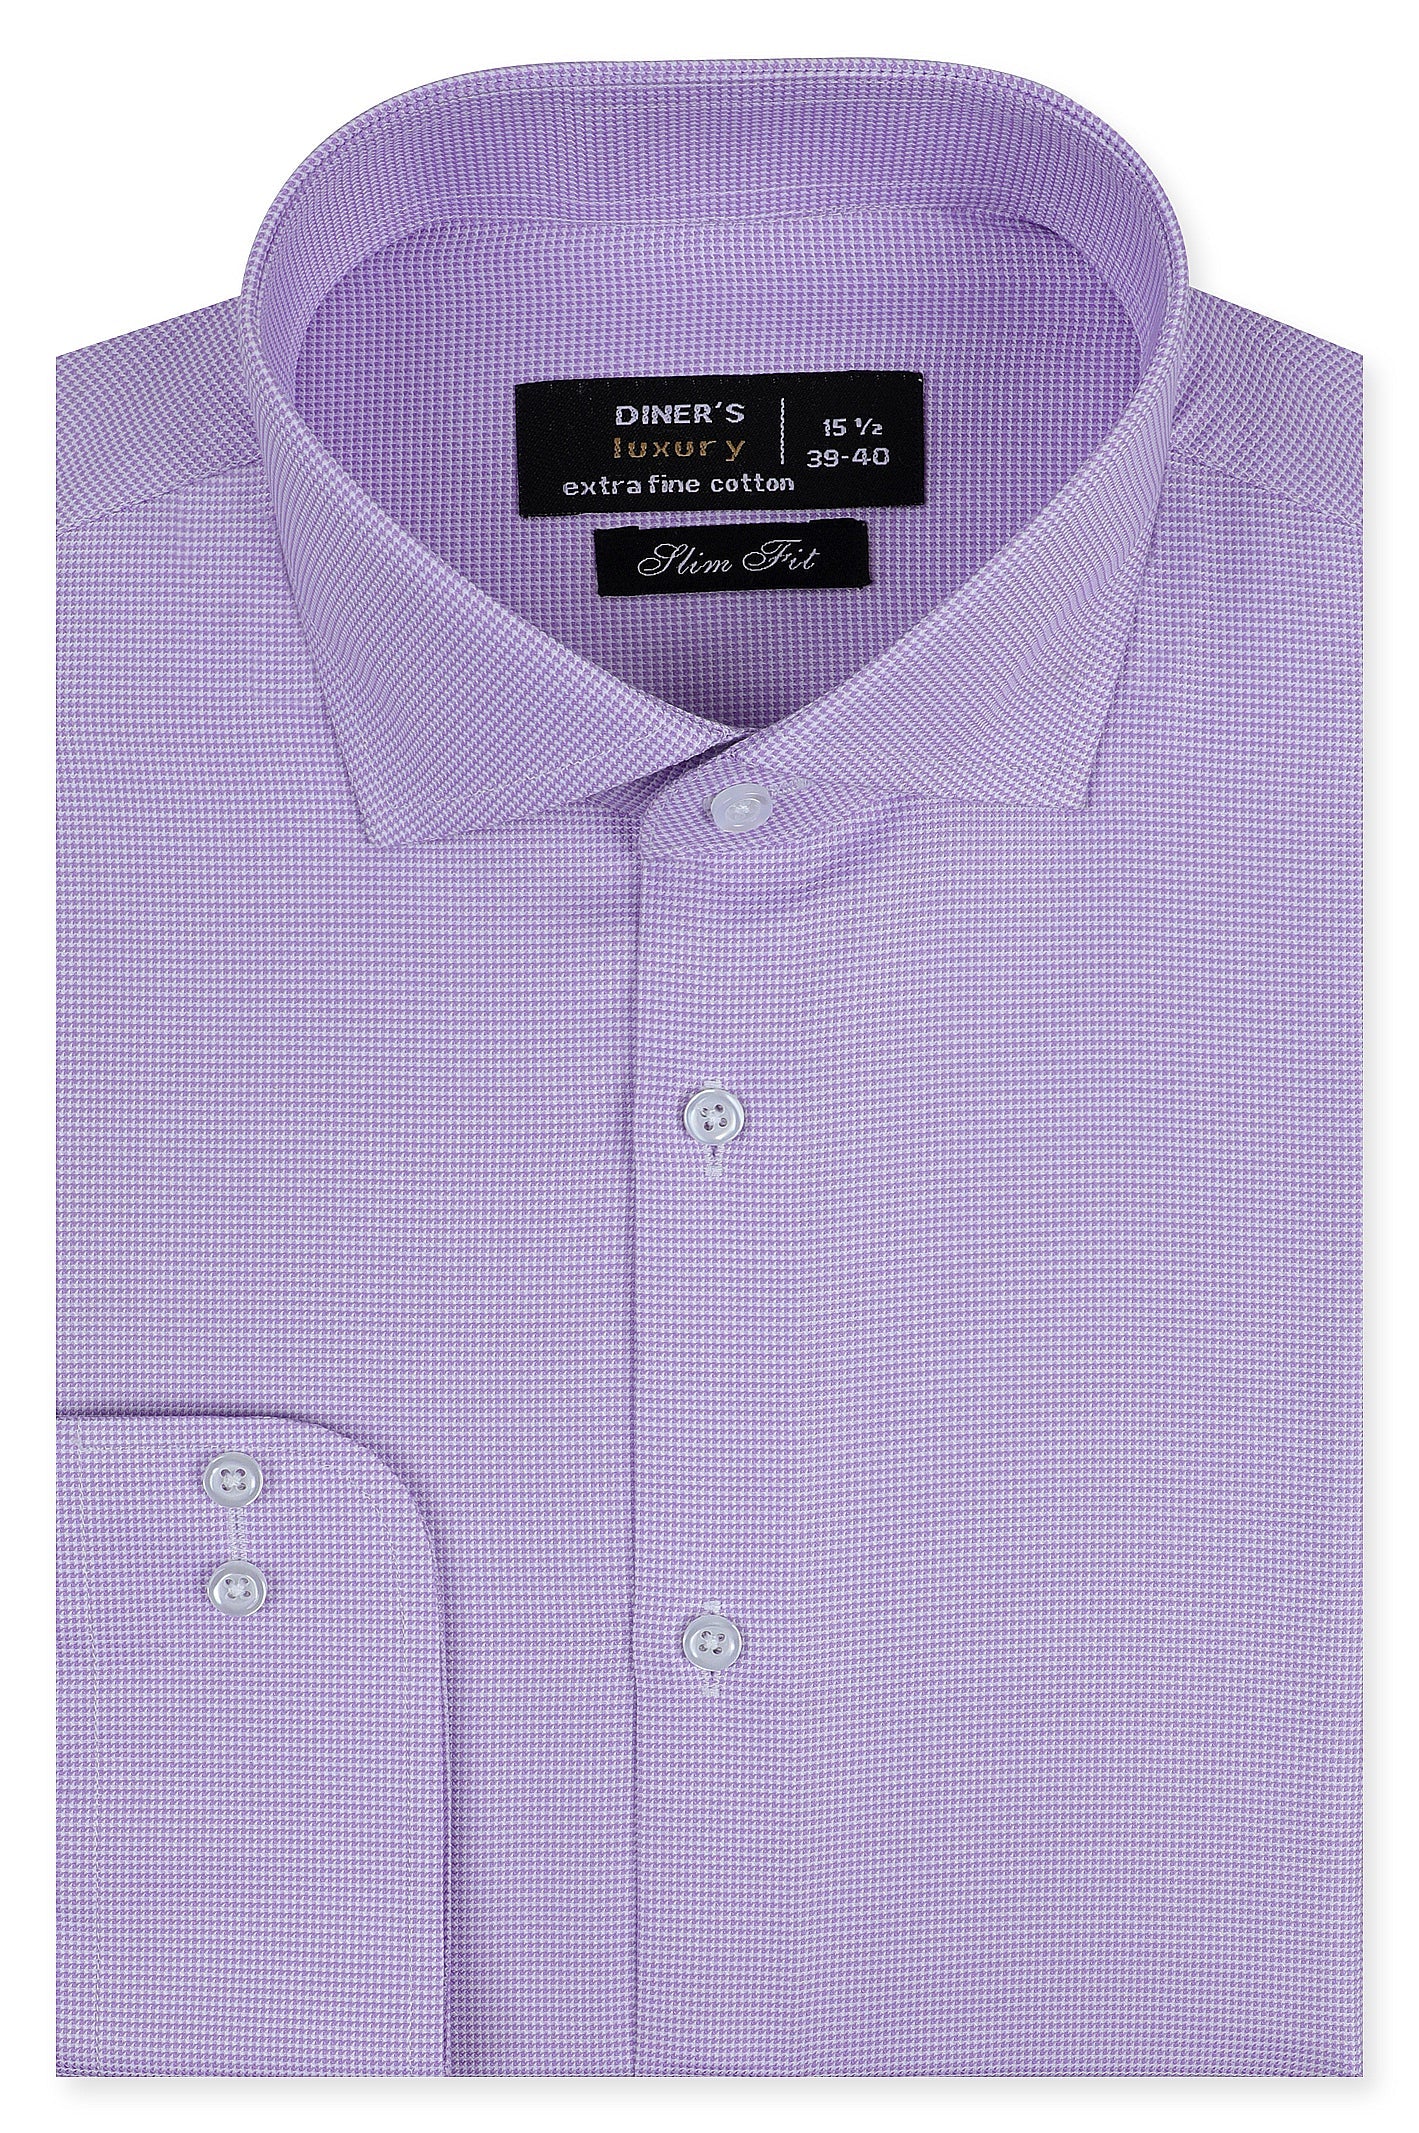 Formal Check Shirt in Purple SKU: AD20145-PURPLE - Diners